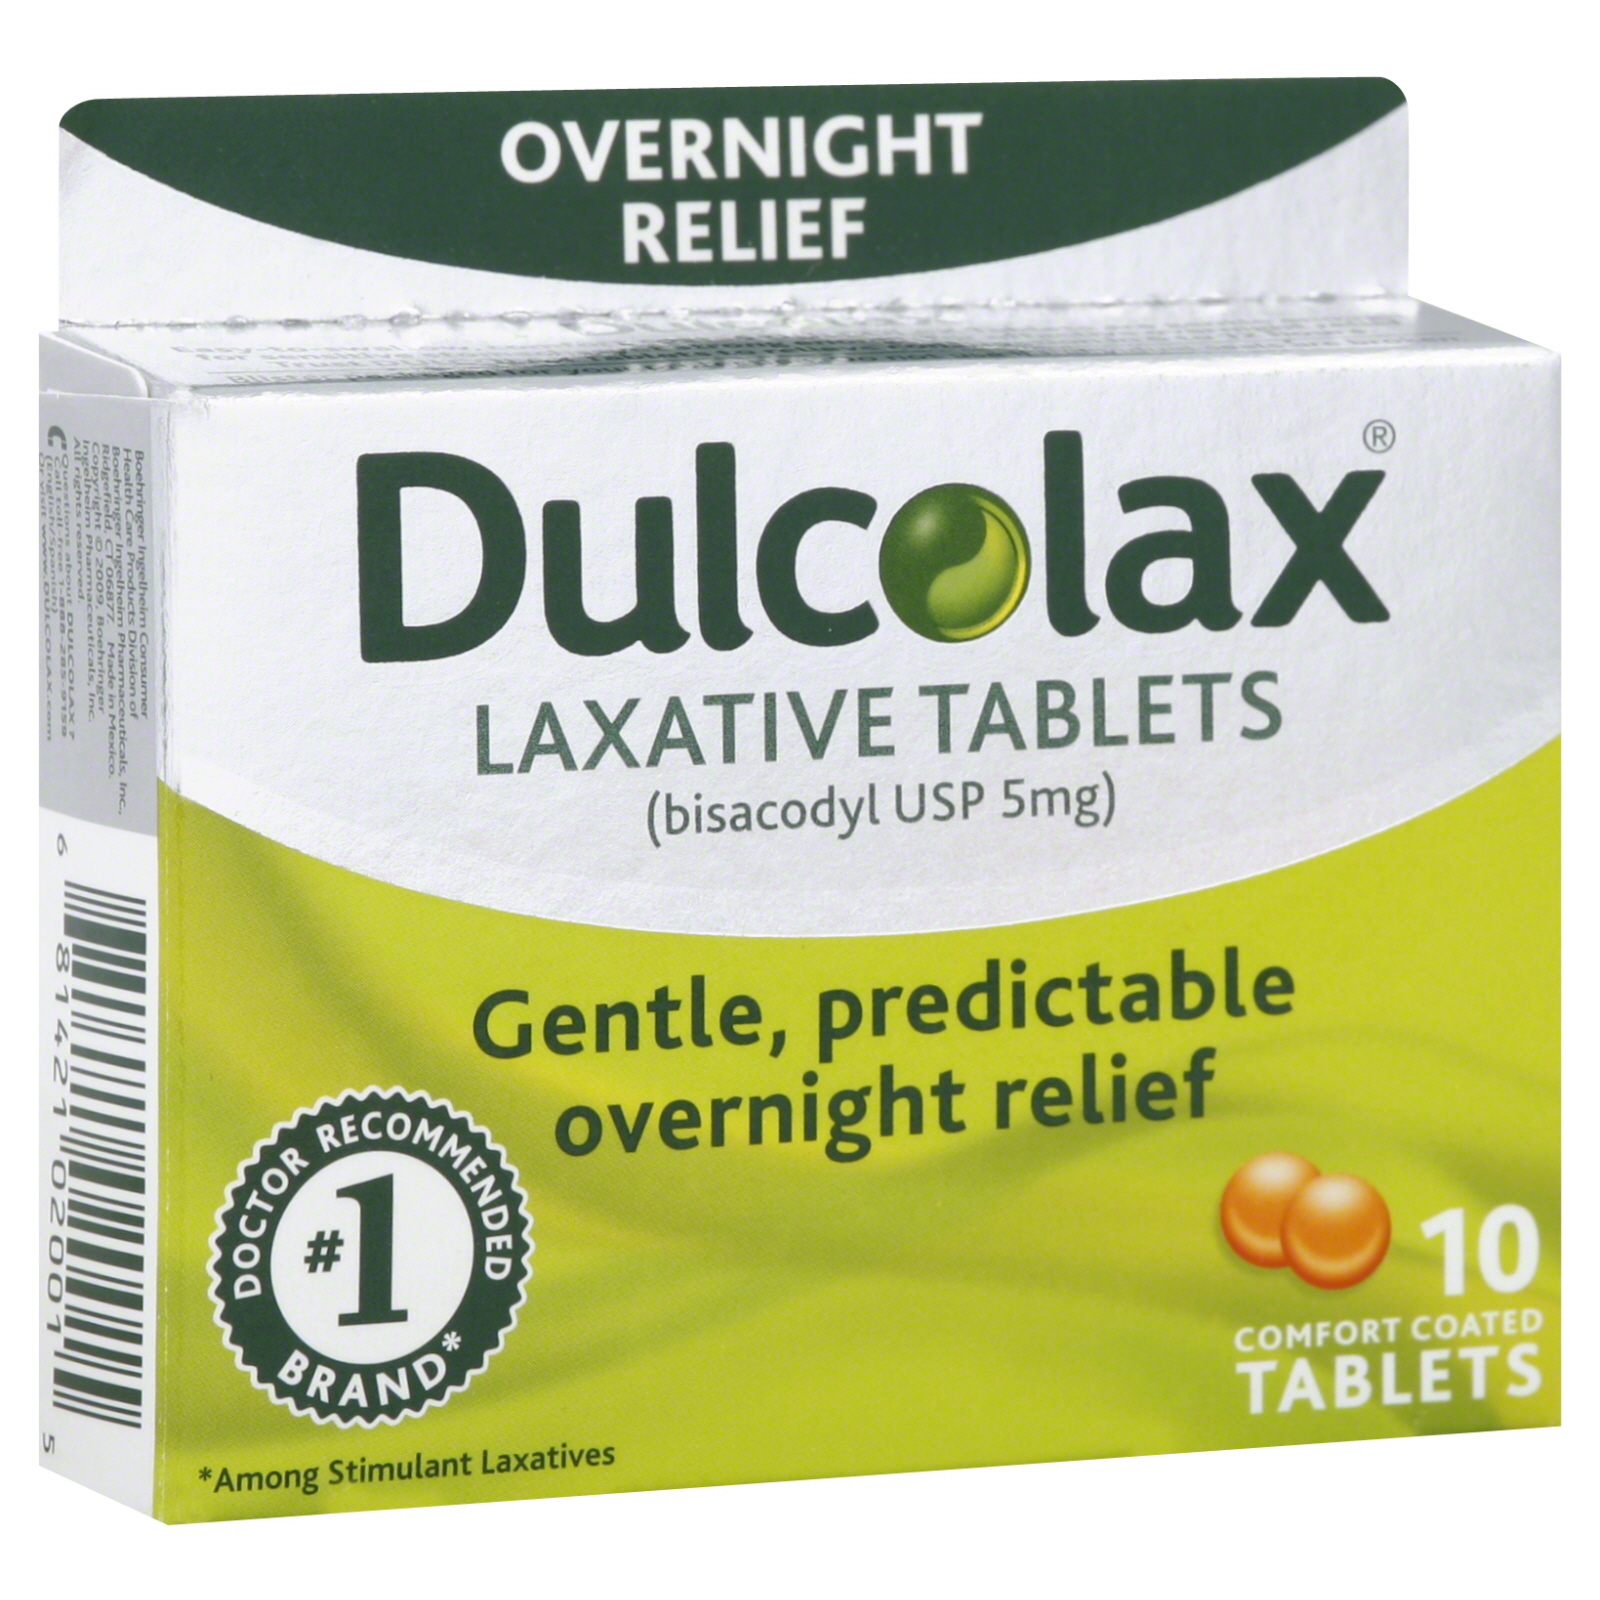 Laxative Comfort Coated Tablets, 10 Count